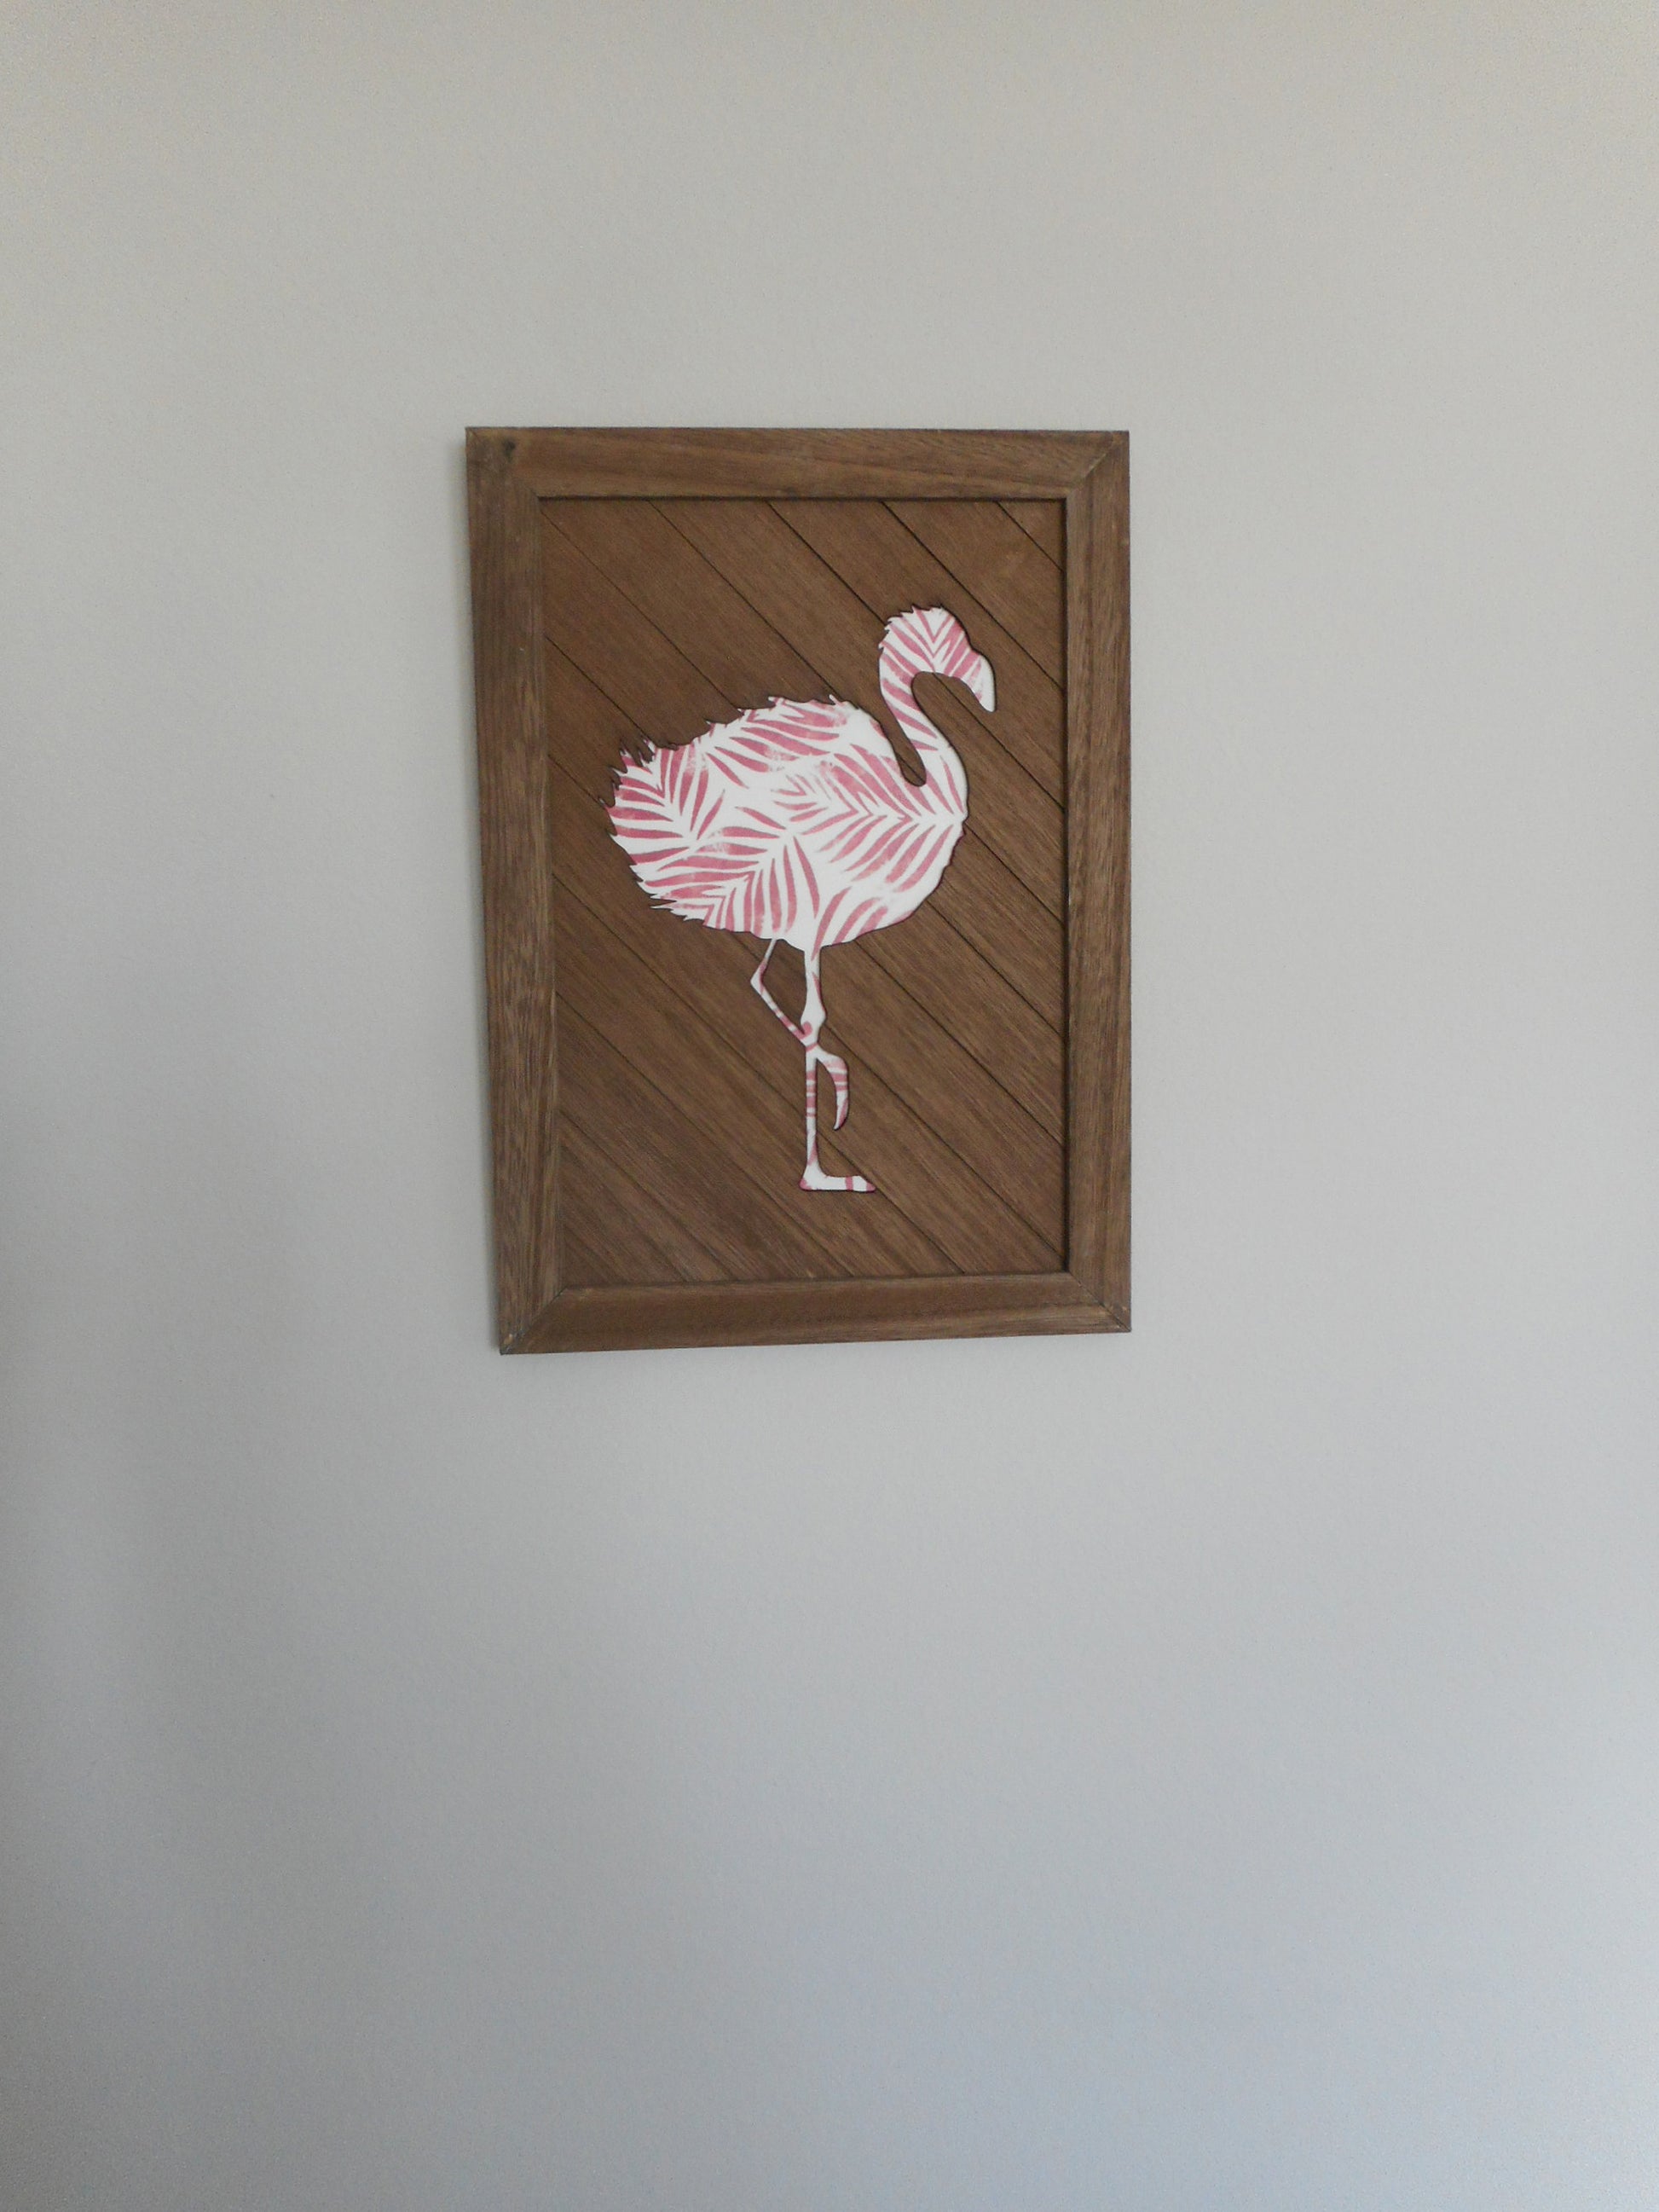 14 x 10 inches, Wood frame and diagonal wood with a cut out of a flamingo.  Underneath is a pink and white print of palm leaves.